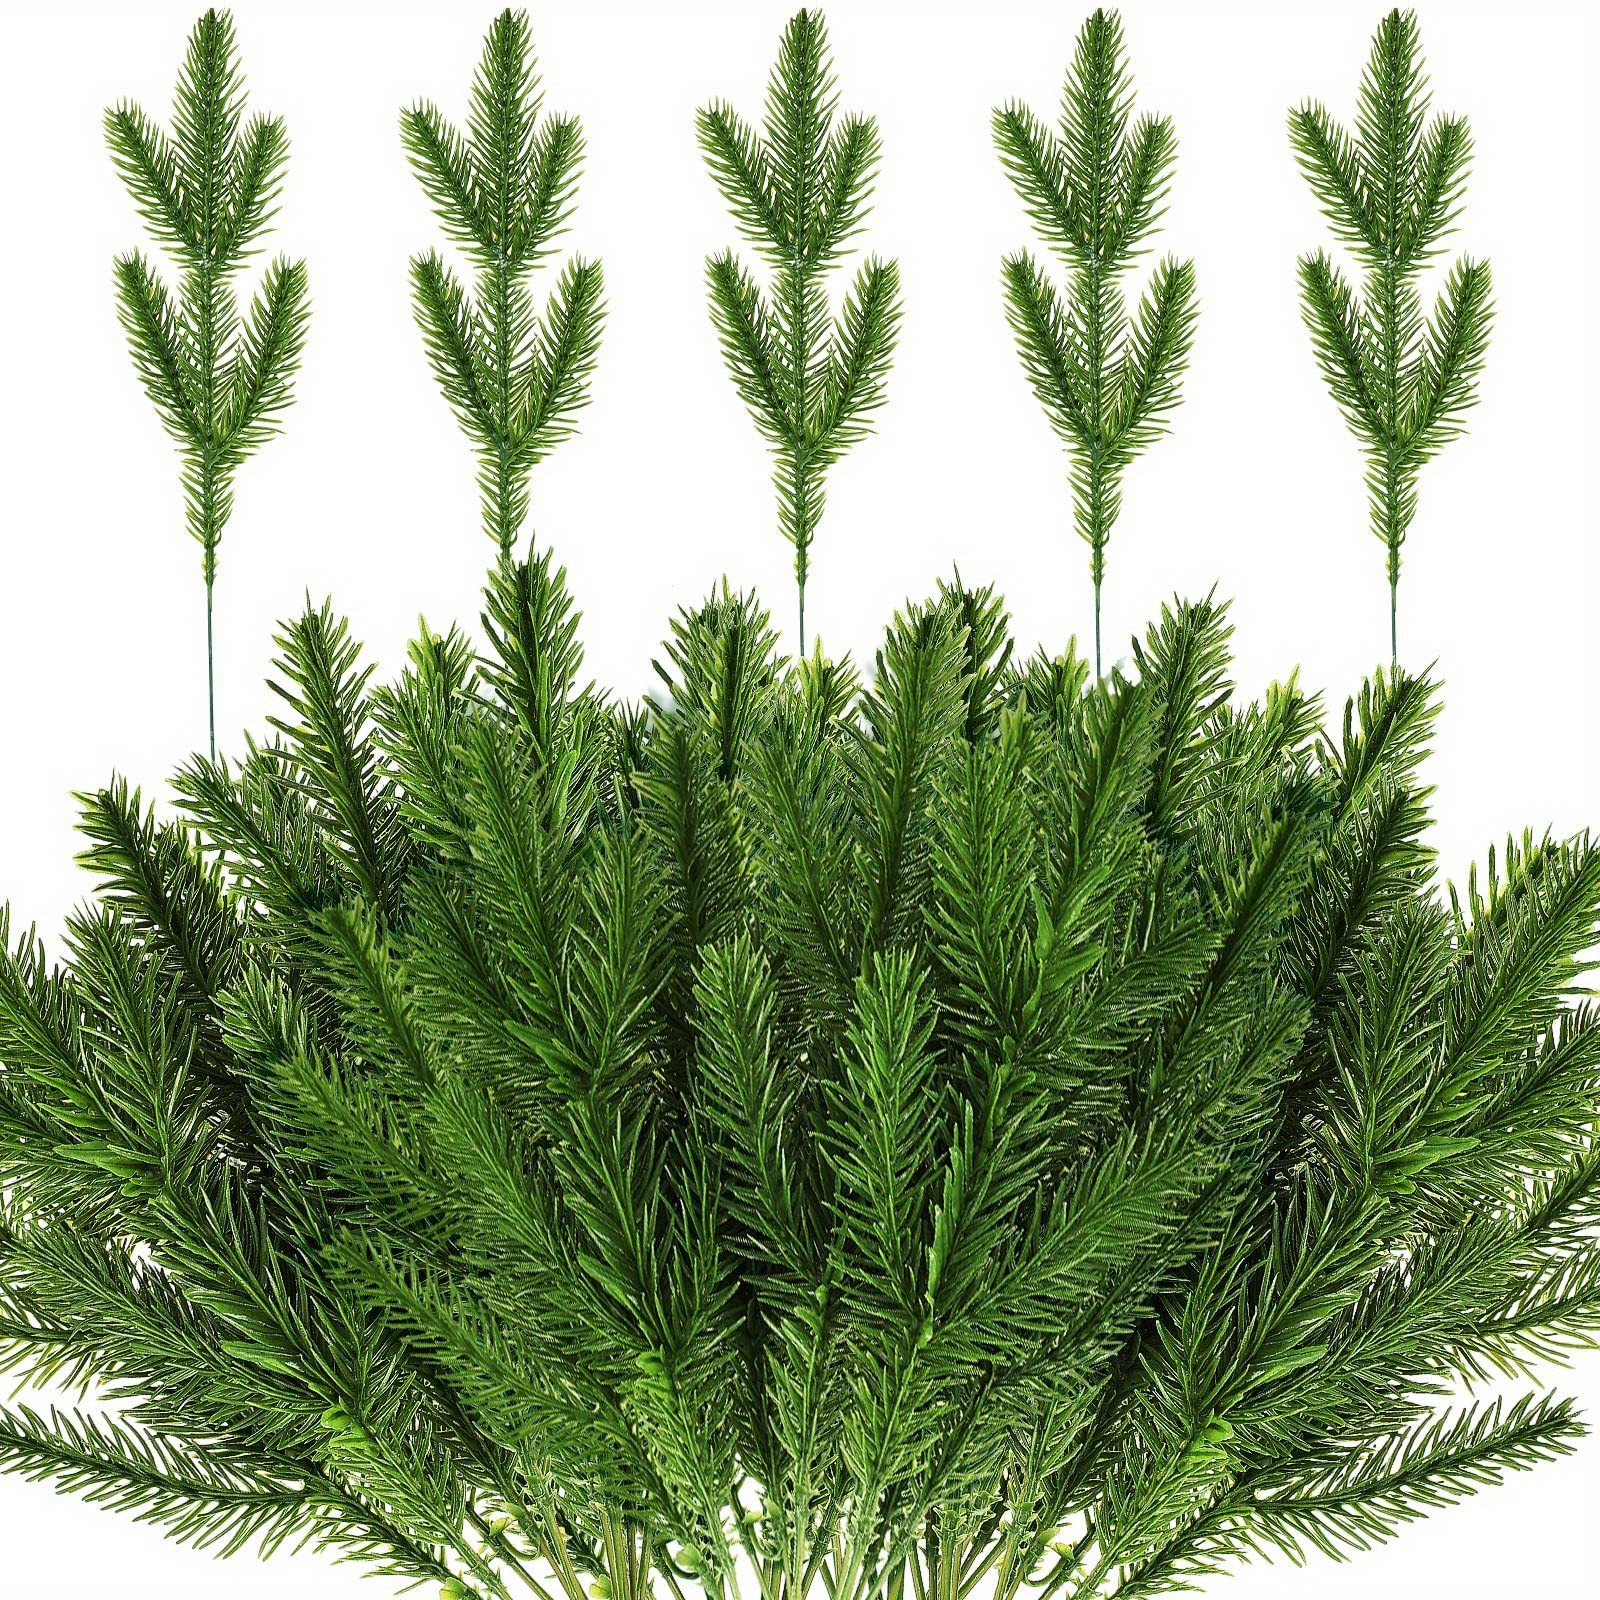  50Pcs 26Cm Pine Leaves for Crafts-Pine Branches for Decorating-Artificial  Pine Branches-Artificial Pine Branches Craft-Pine Leaves Decorations-Artificial  Flower for Home Decor Indoor-Home Decor Access : Home & Kitchen